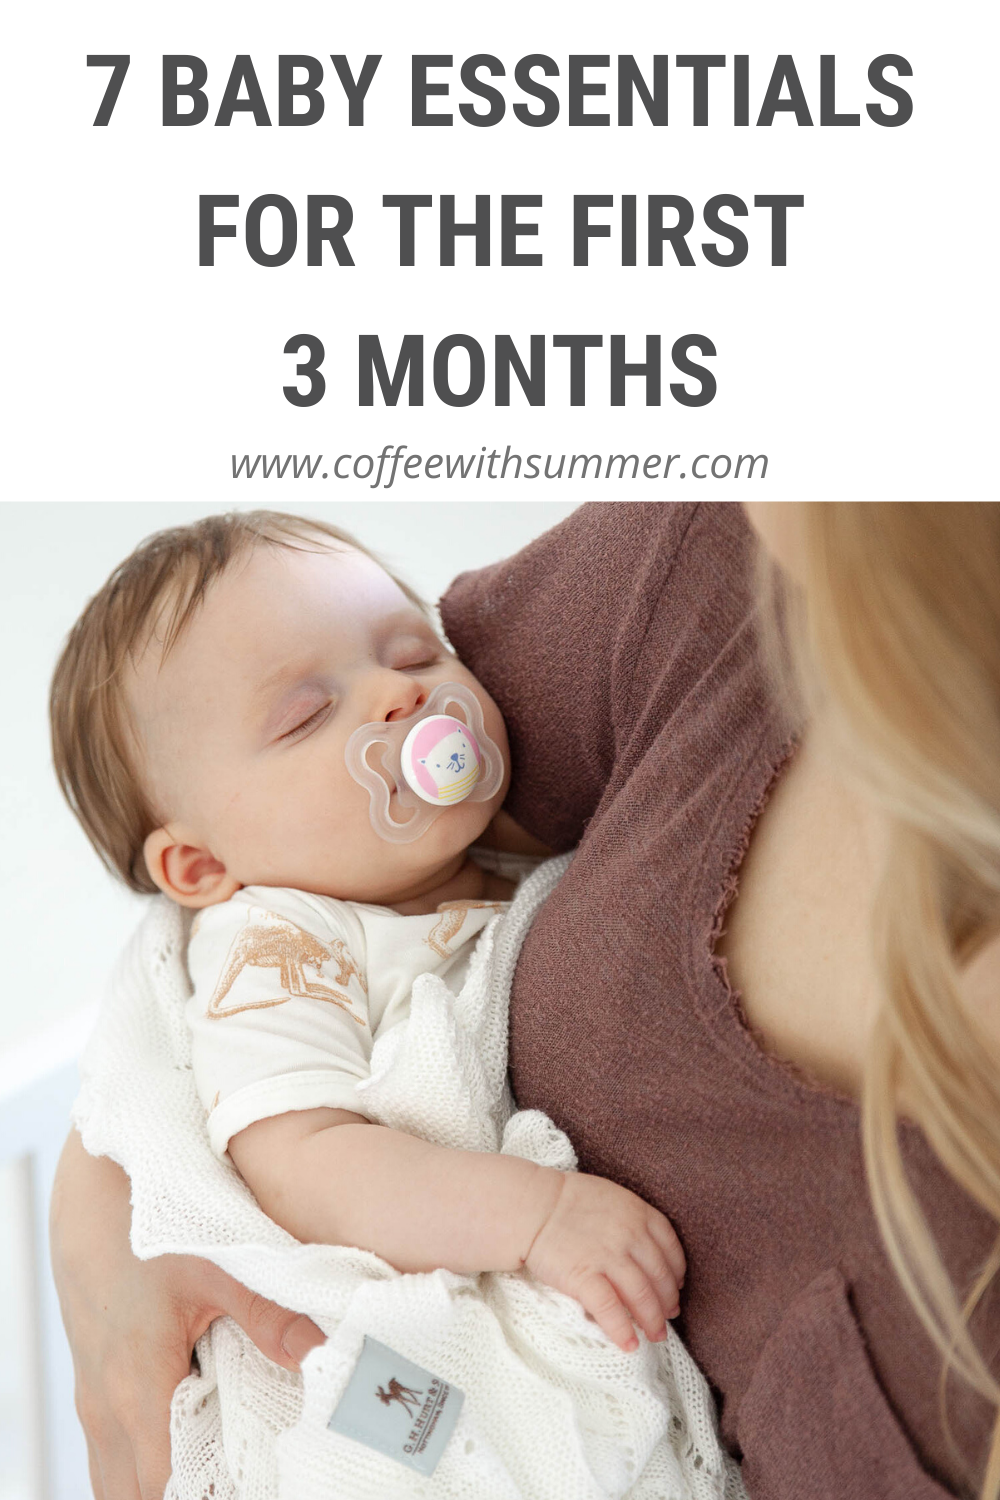 Top Baby Essentials For The First 3 Months - Coffee With Summer